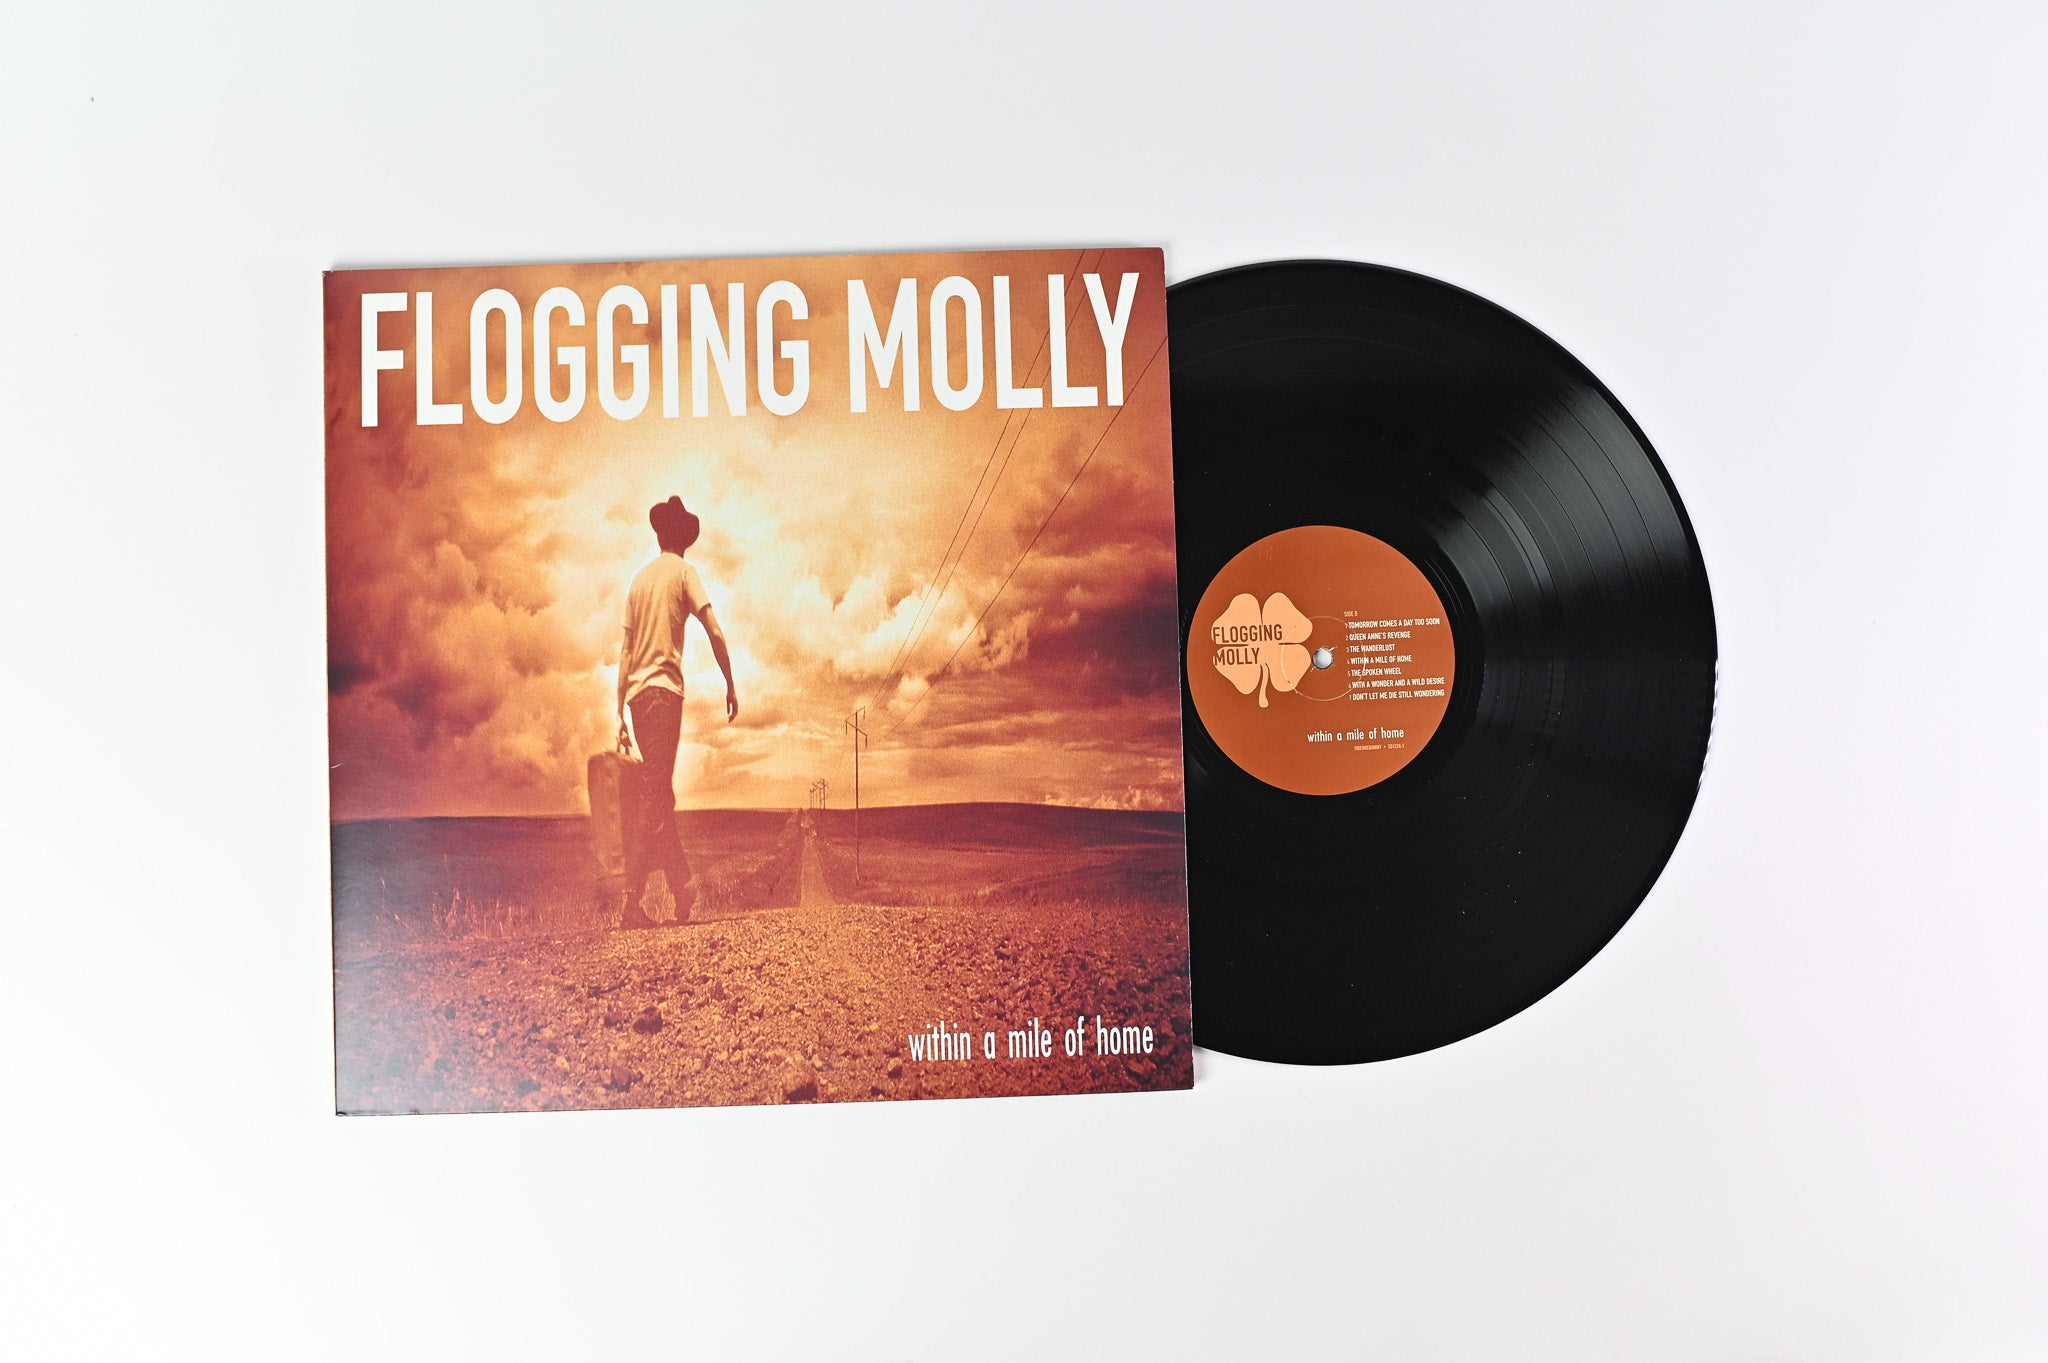 Home　Flogging　Gatefold　Molly　Records　Reissu　Of　SideOneDummy　Within　A　on　Mile　–　Plaid　Room